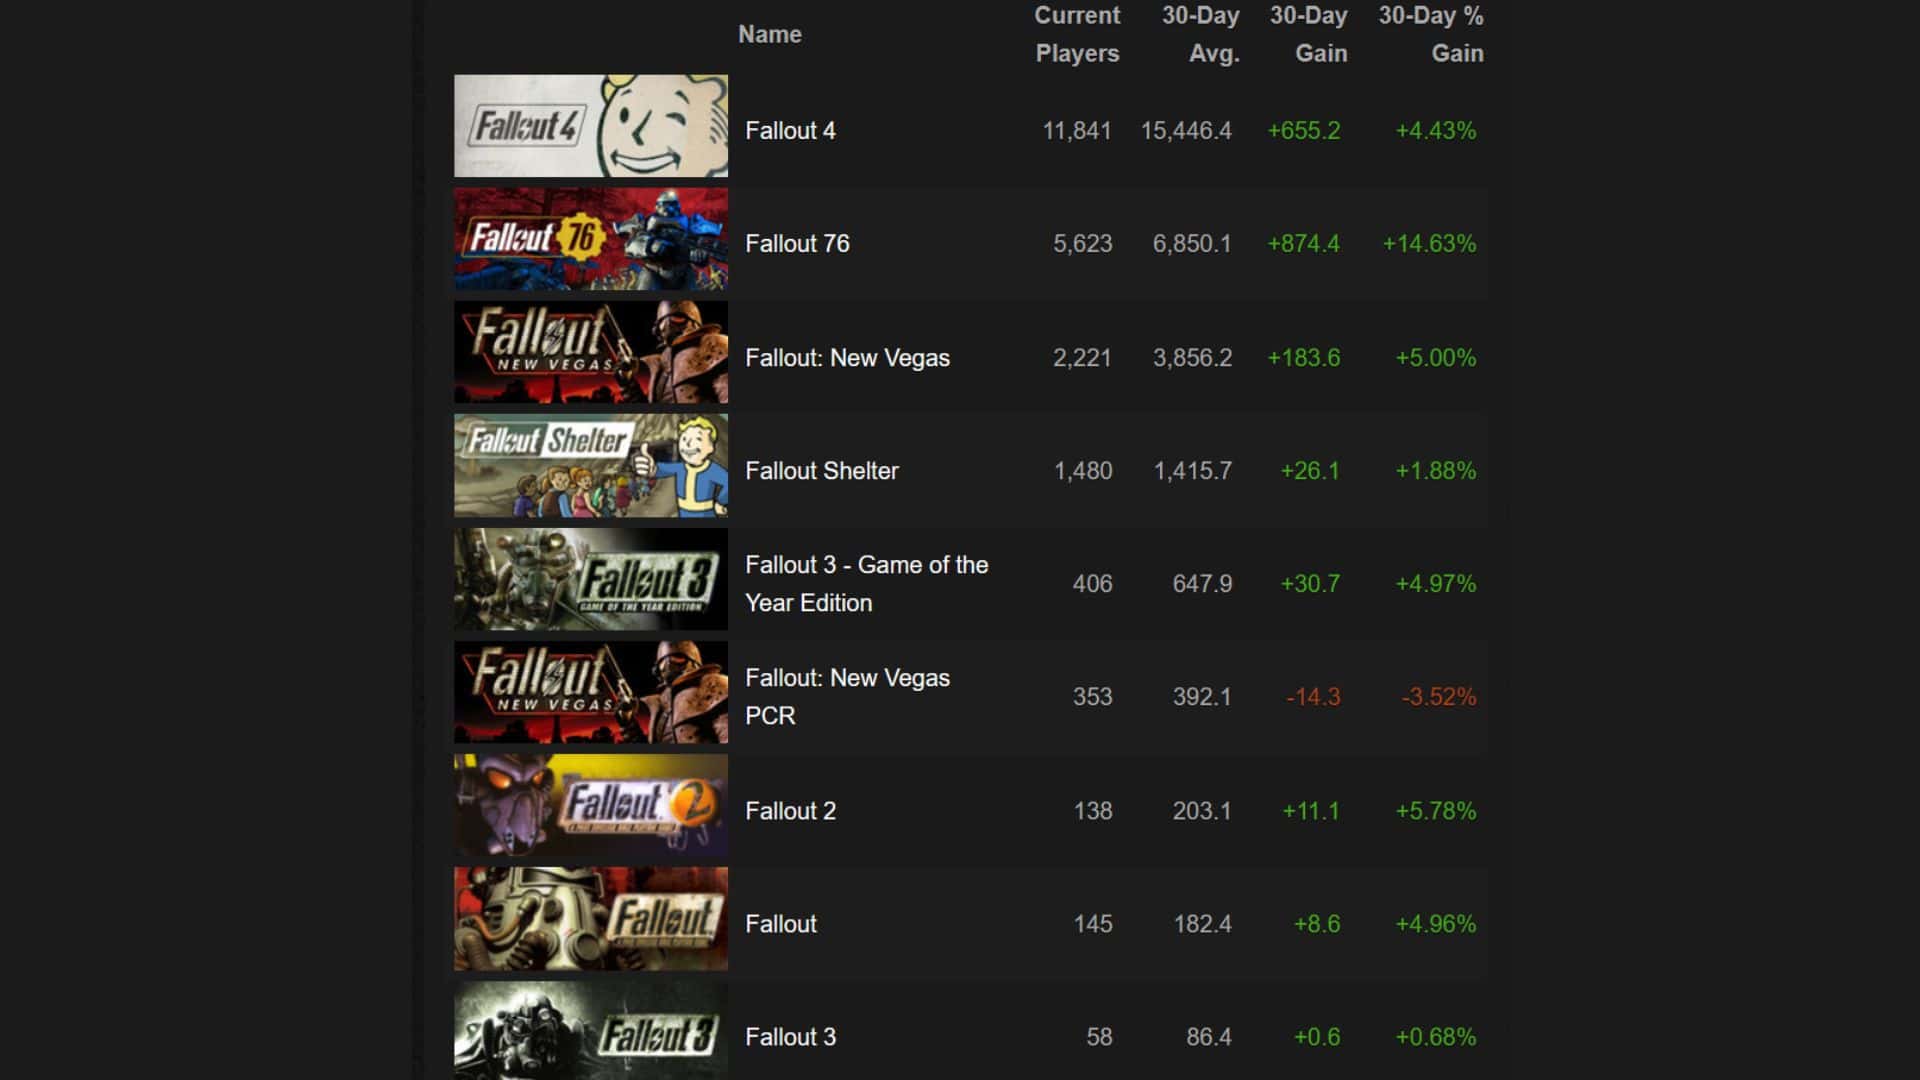 Fallout Steam player count